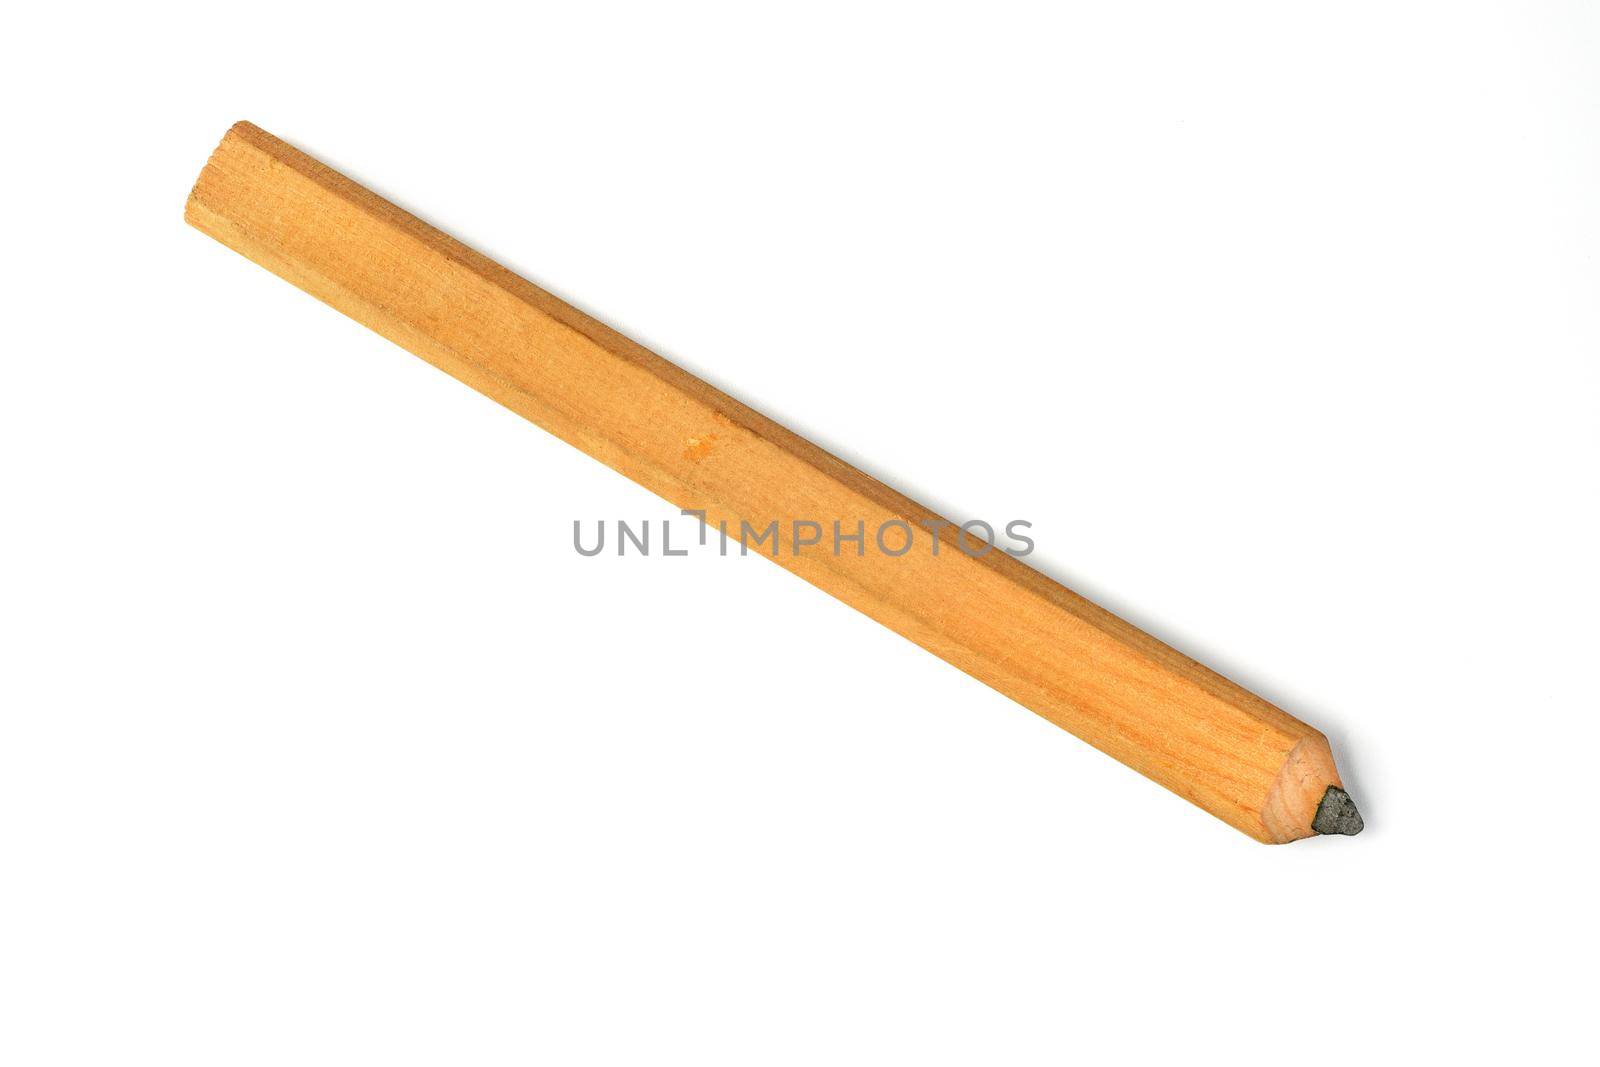 Carpenter's Pencil Isolated on a White Background by markvandam